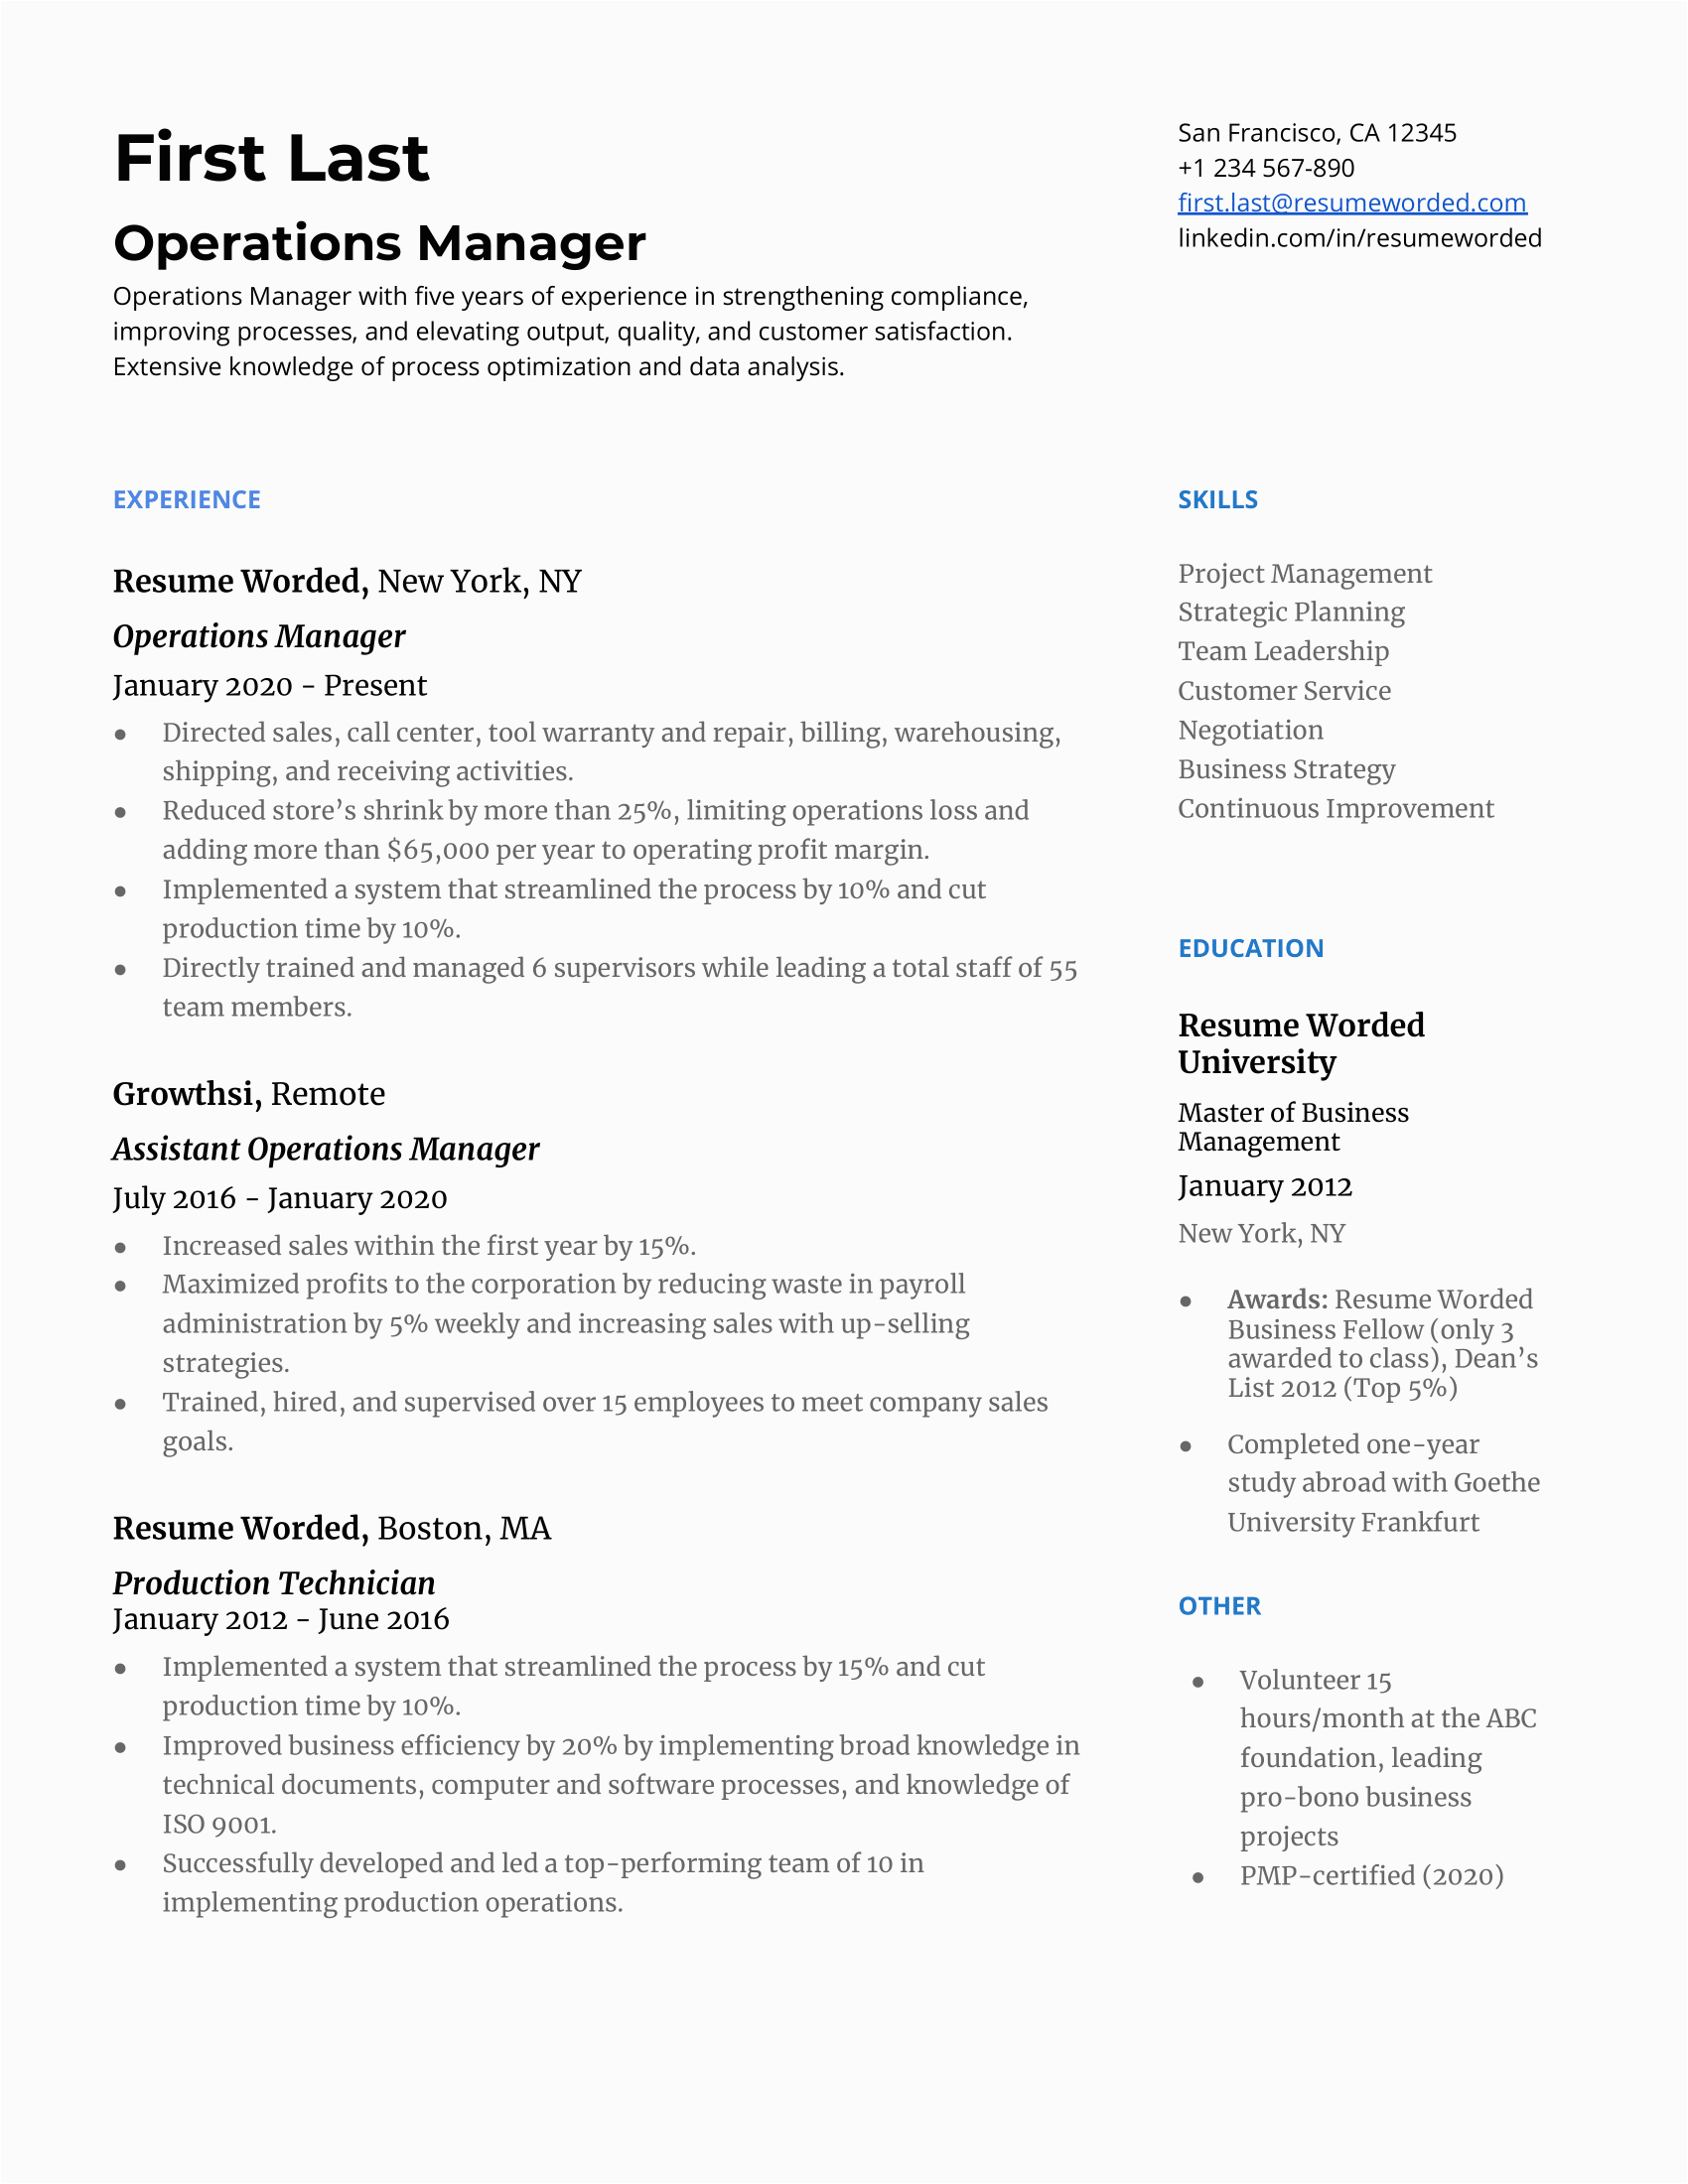 Operations Manager with One Year Experience Sample Resume 11 Operations Manager Resume Examples for 2022